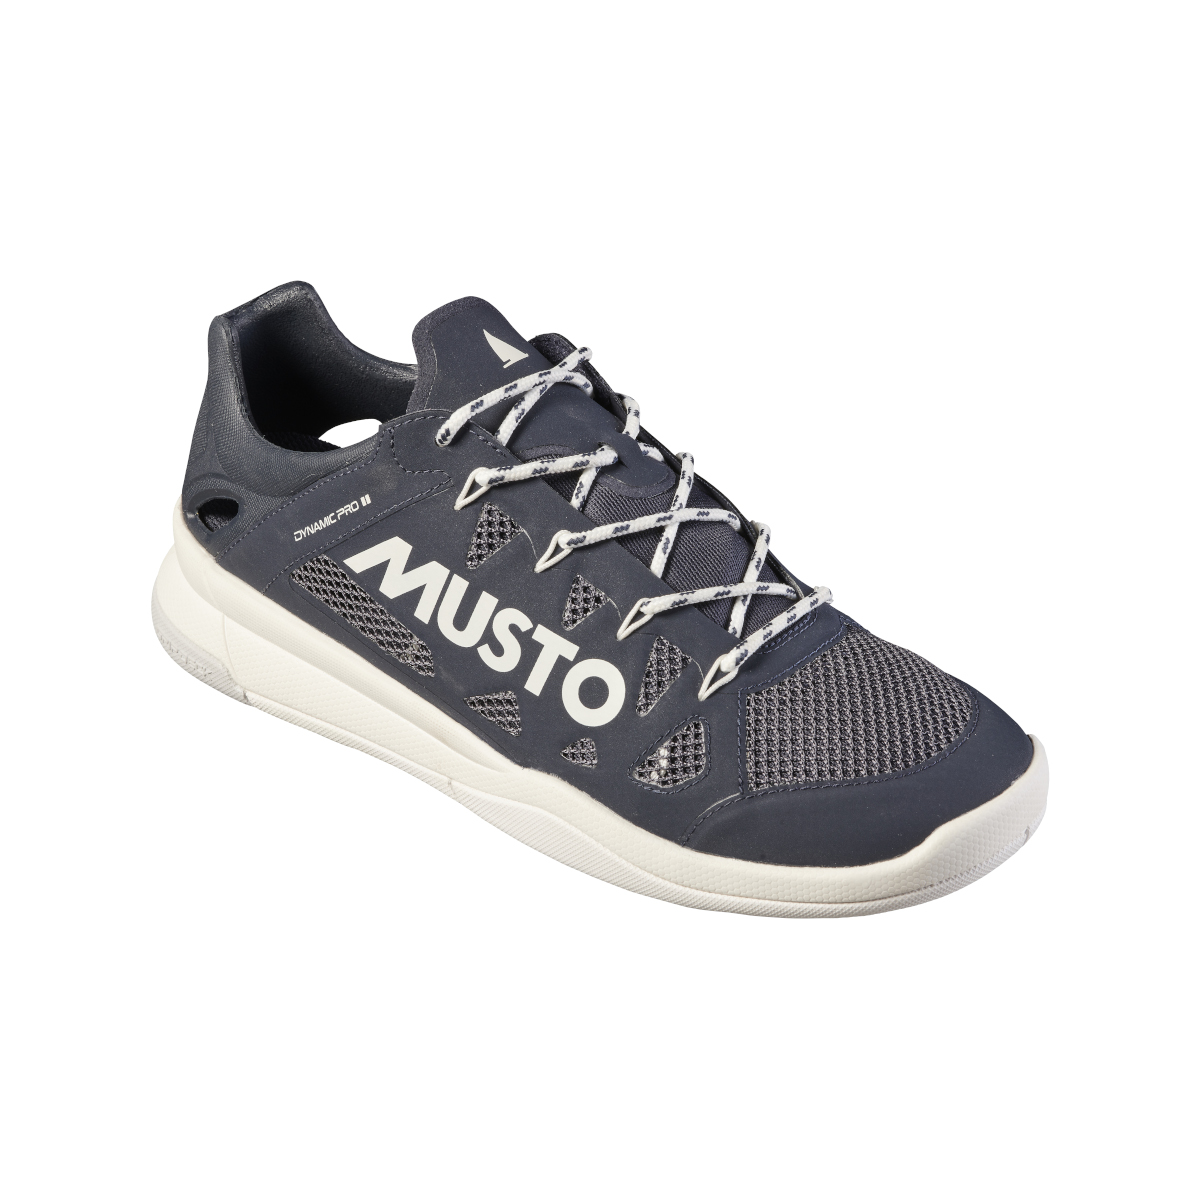 Musto Dynamic Pro II chaussures de voile homme bleu marine, taille 42,5